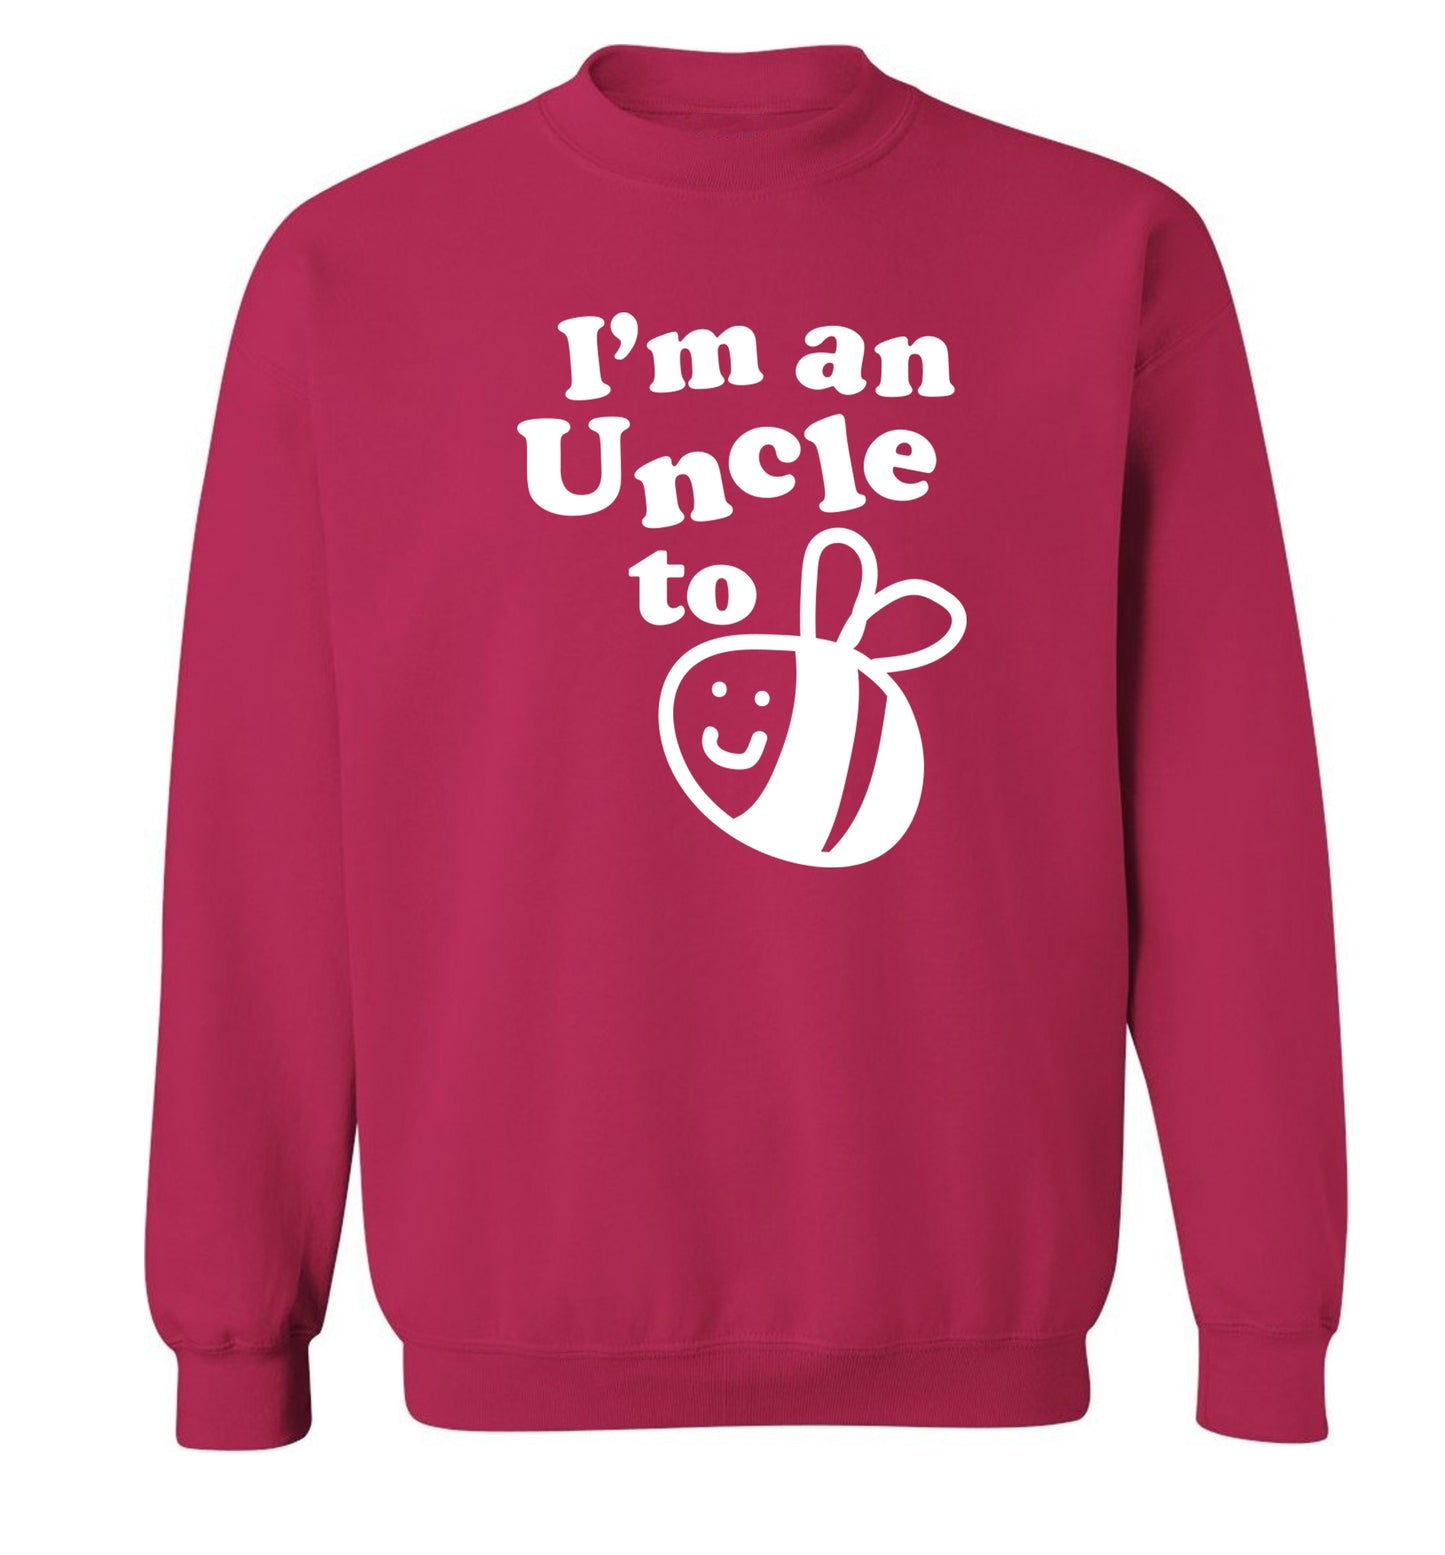 I'm an uncle to be Adult's unisex pink Sweater 2XL